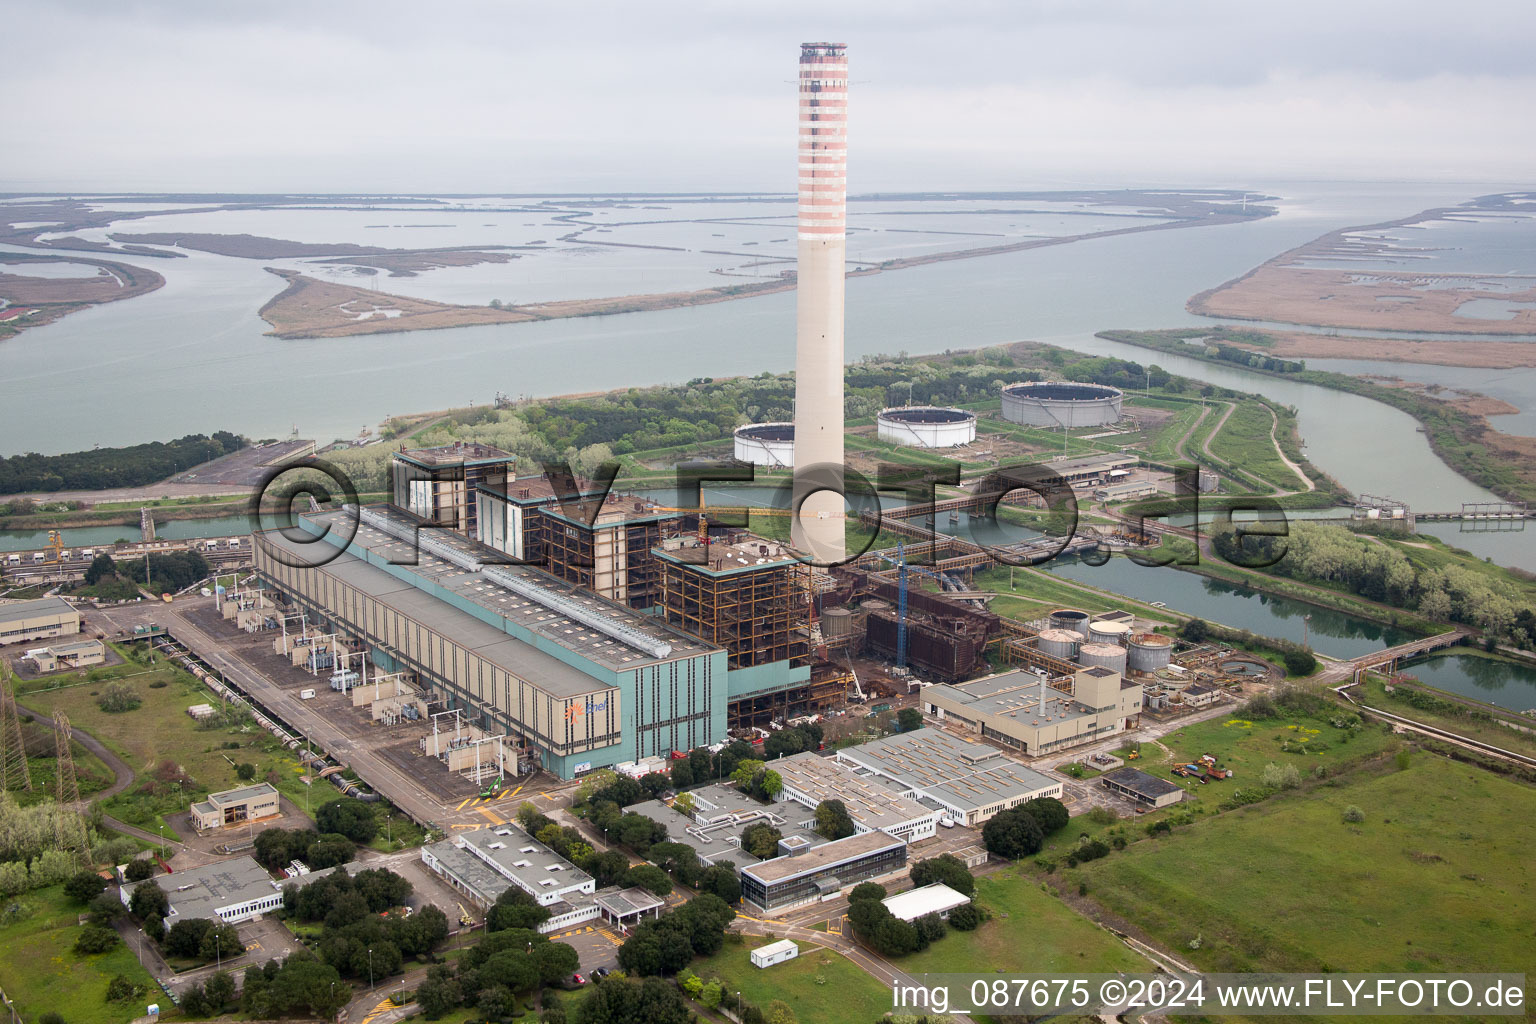 Aerial view of Power plants and exhaust towers of electrical power station at the mouth of river Po in Centrale Enel in Veneto, Italy